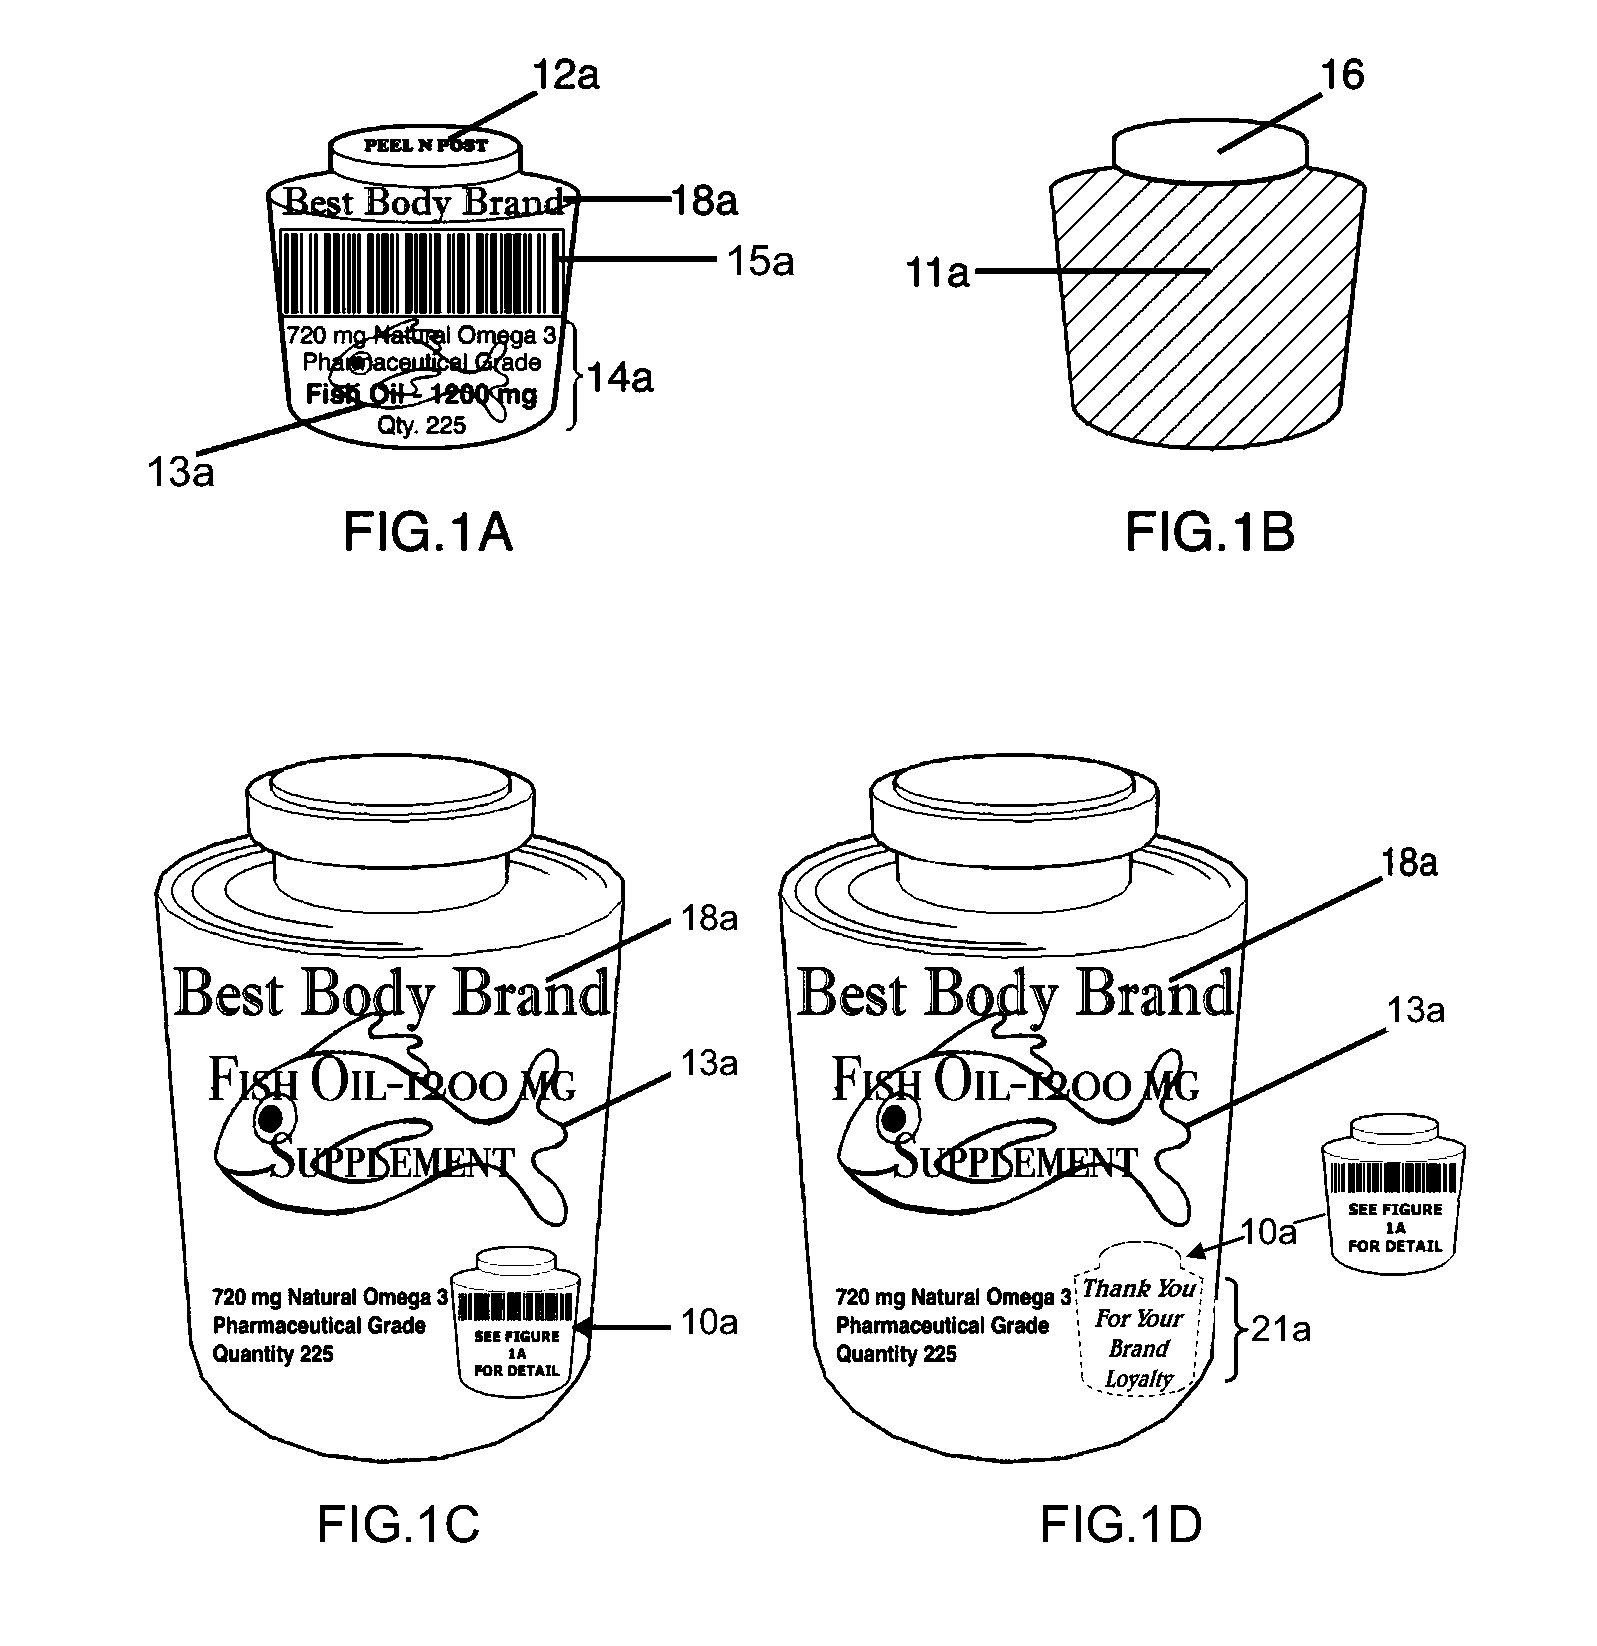 Consumer product recognition system